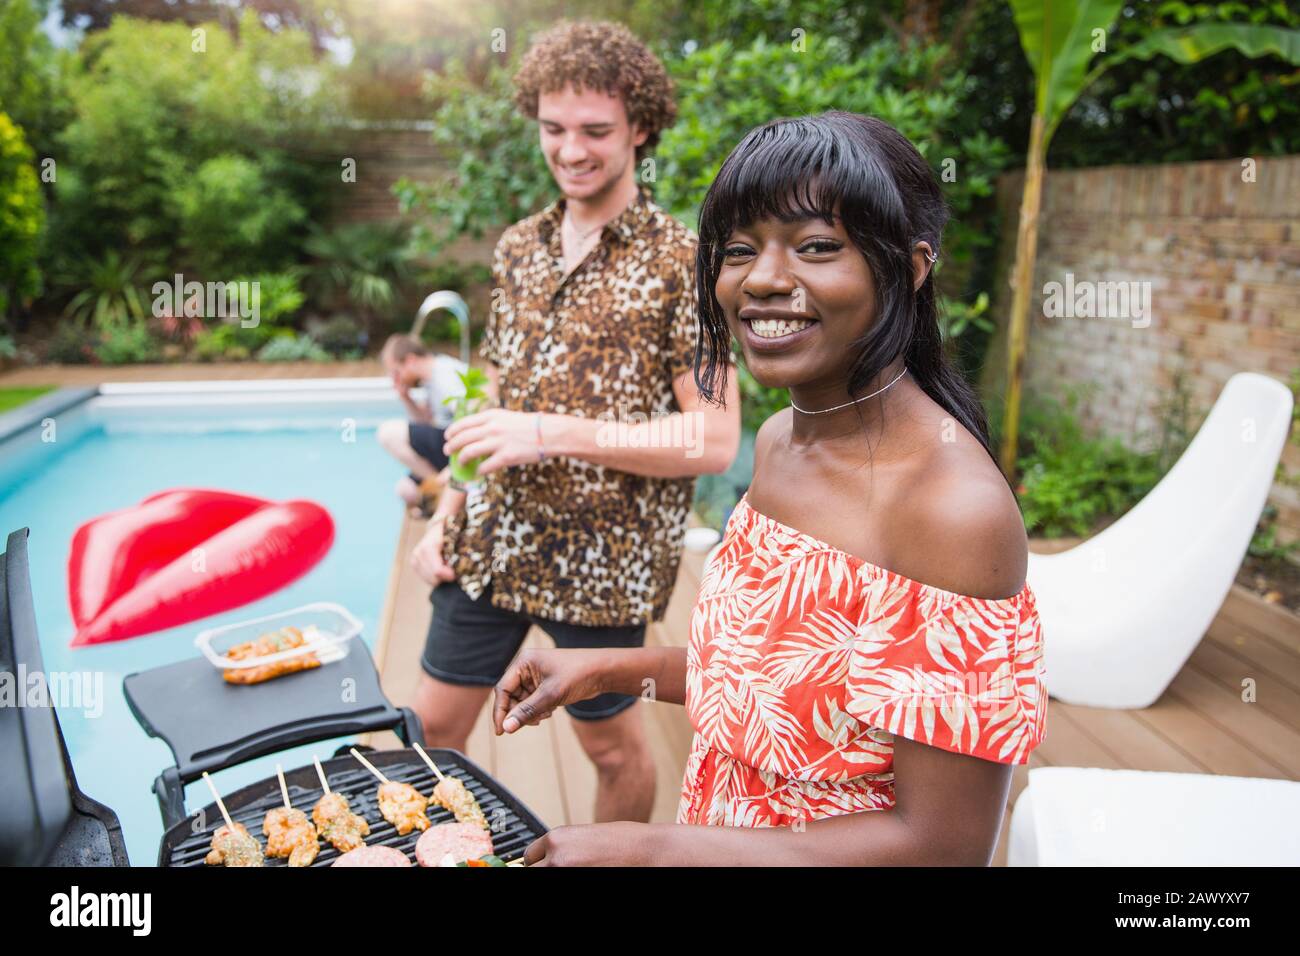 Portrait happy young multiethnic couple barbecuing at poolside Stock Photo